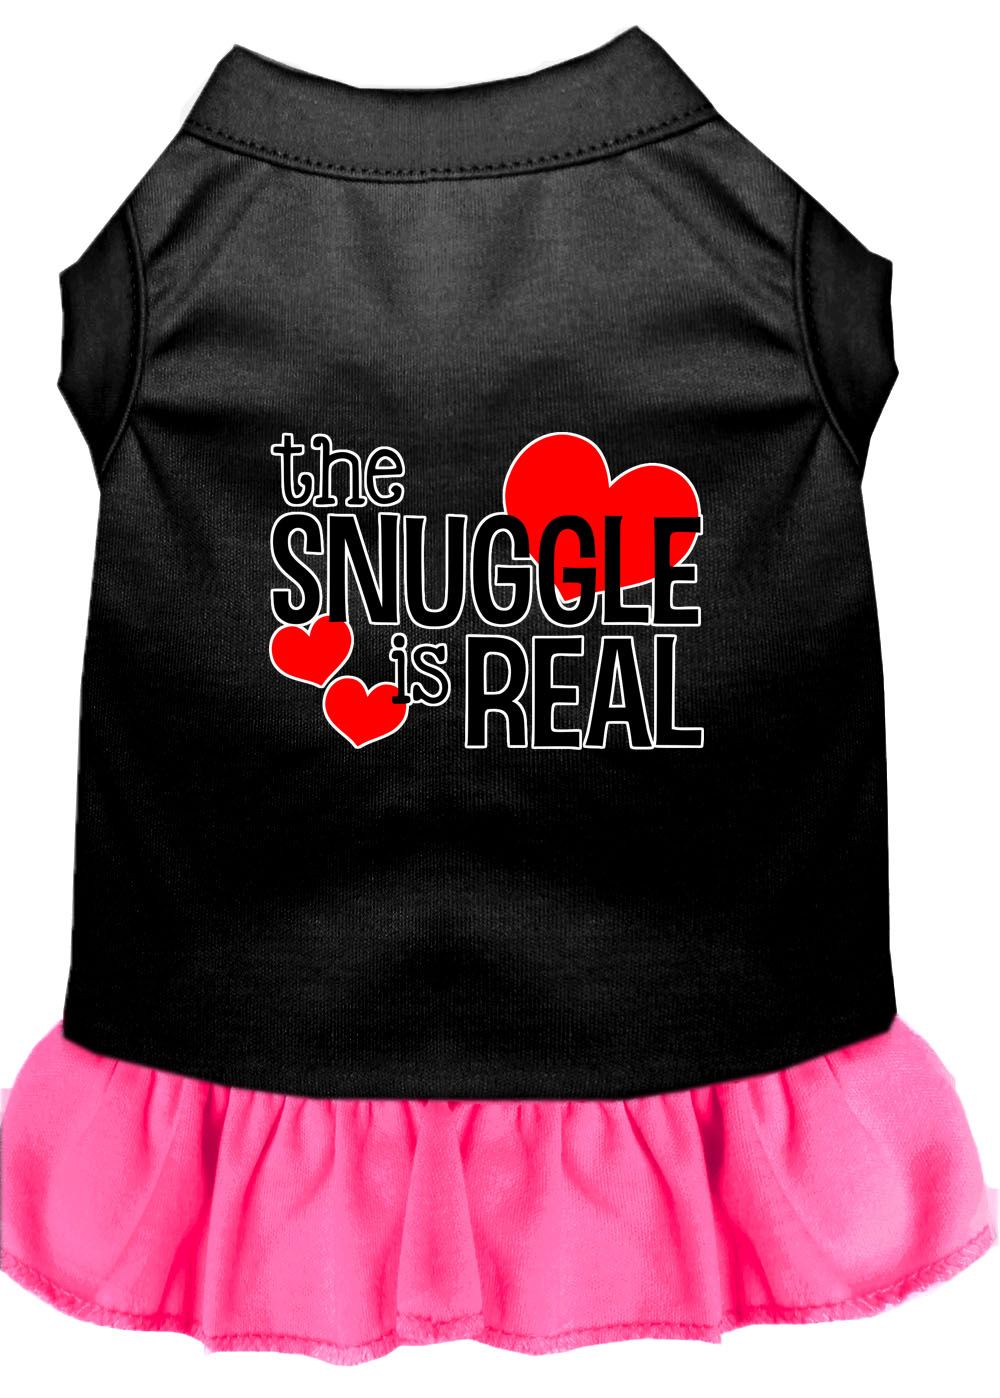 The Snuggle is Real Screen Print Dog Dress Black with Bright Pink Sm